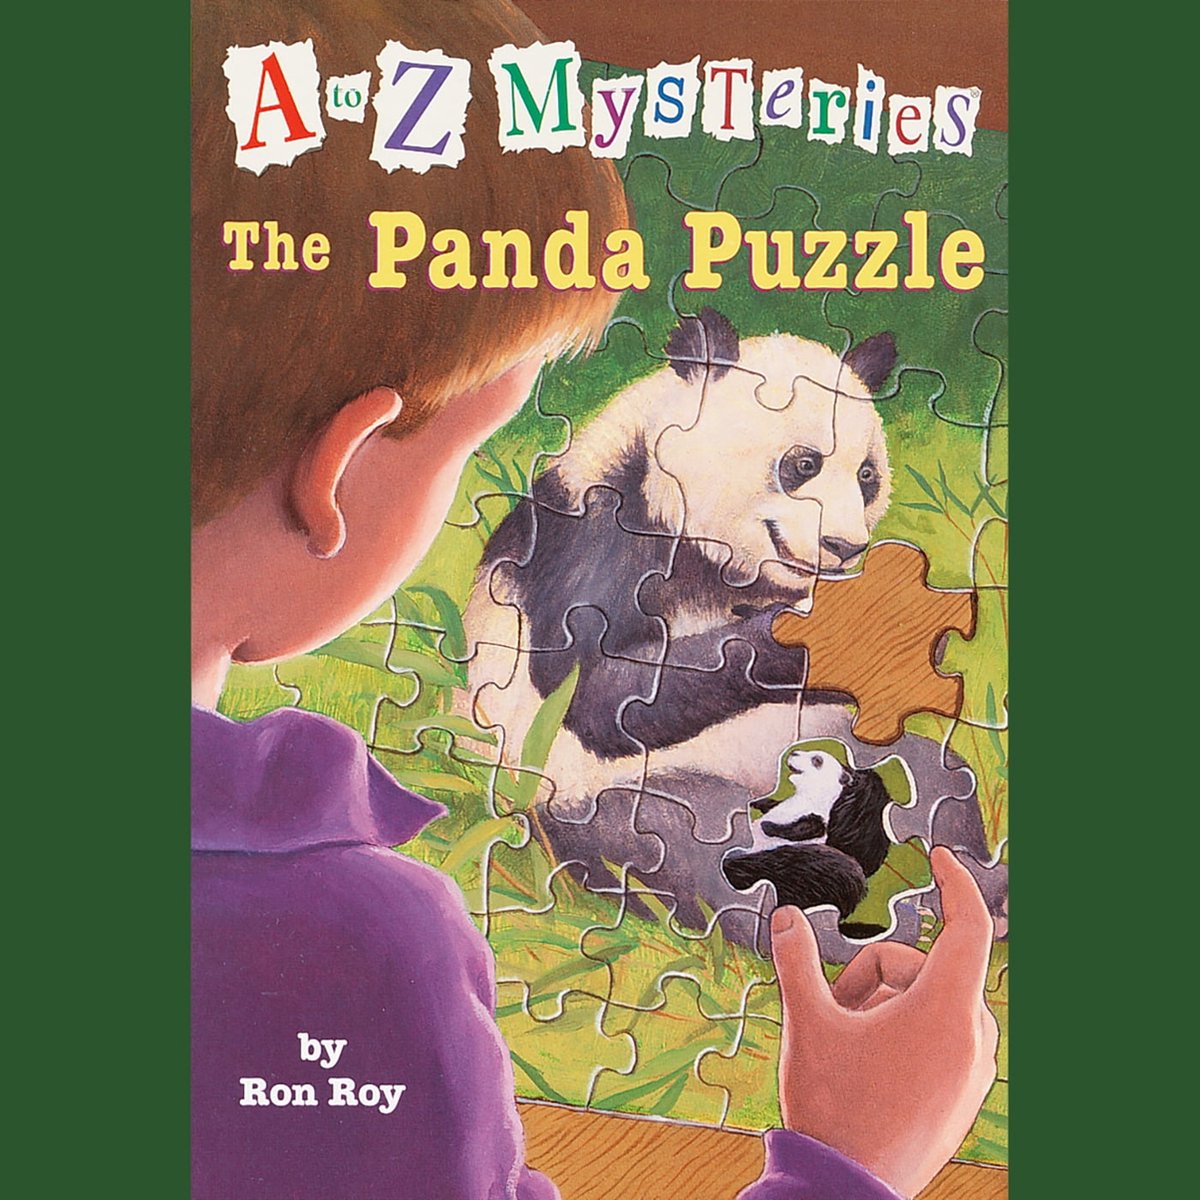 A to Z Mysteries: The Panda Puzzle - Ron Roy